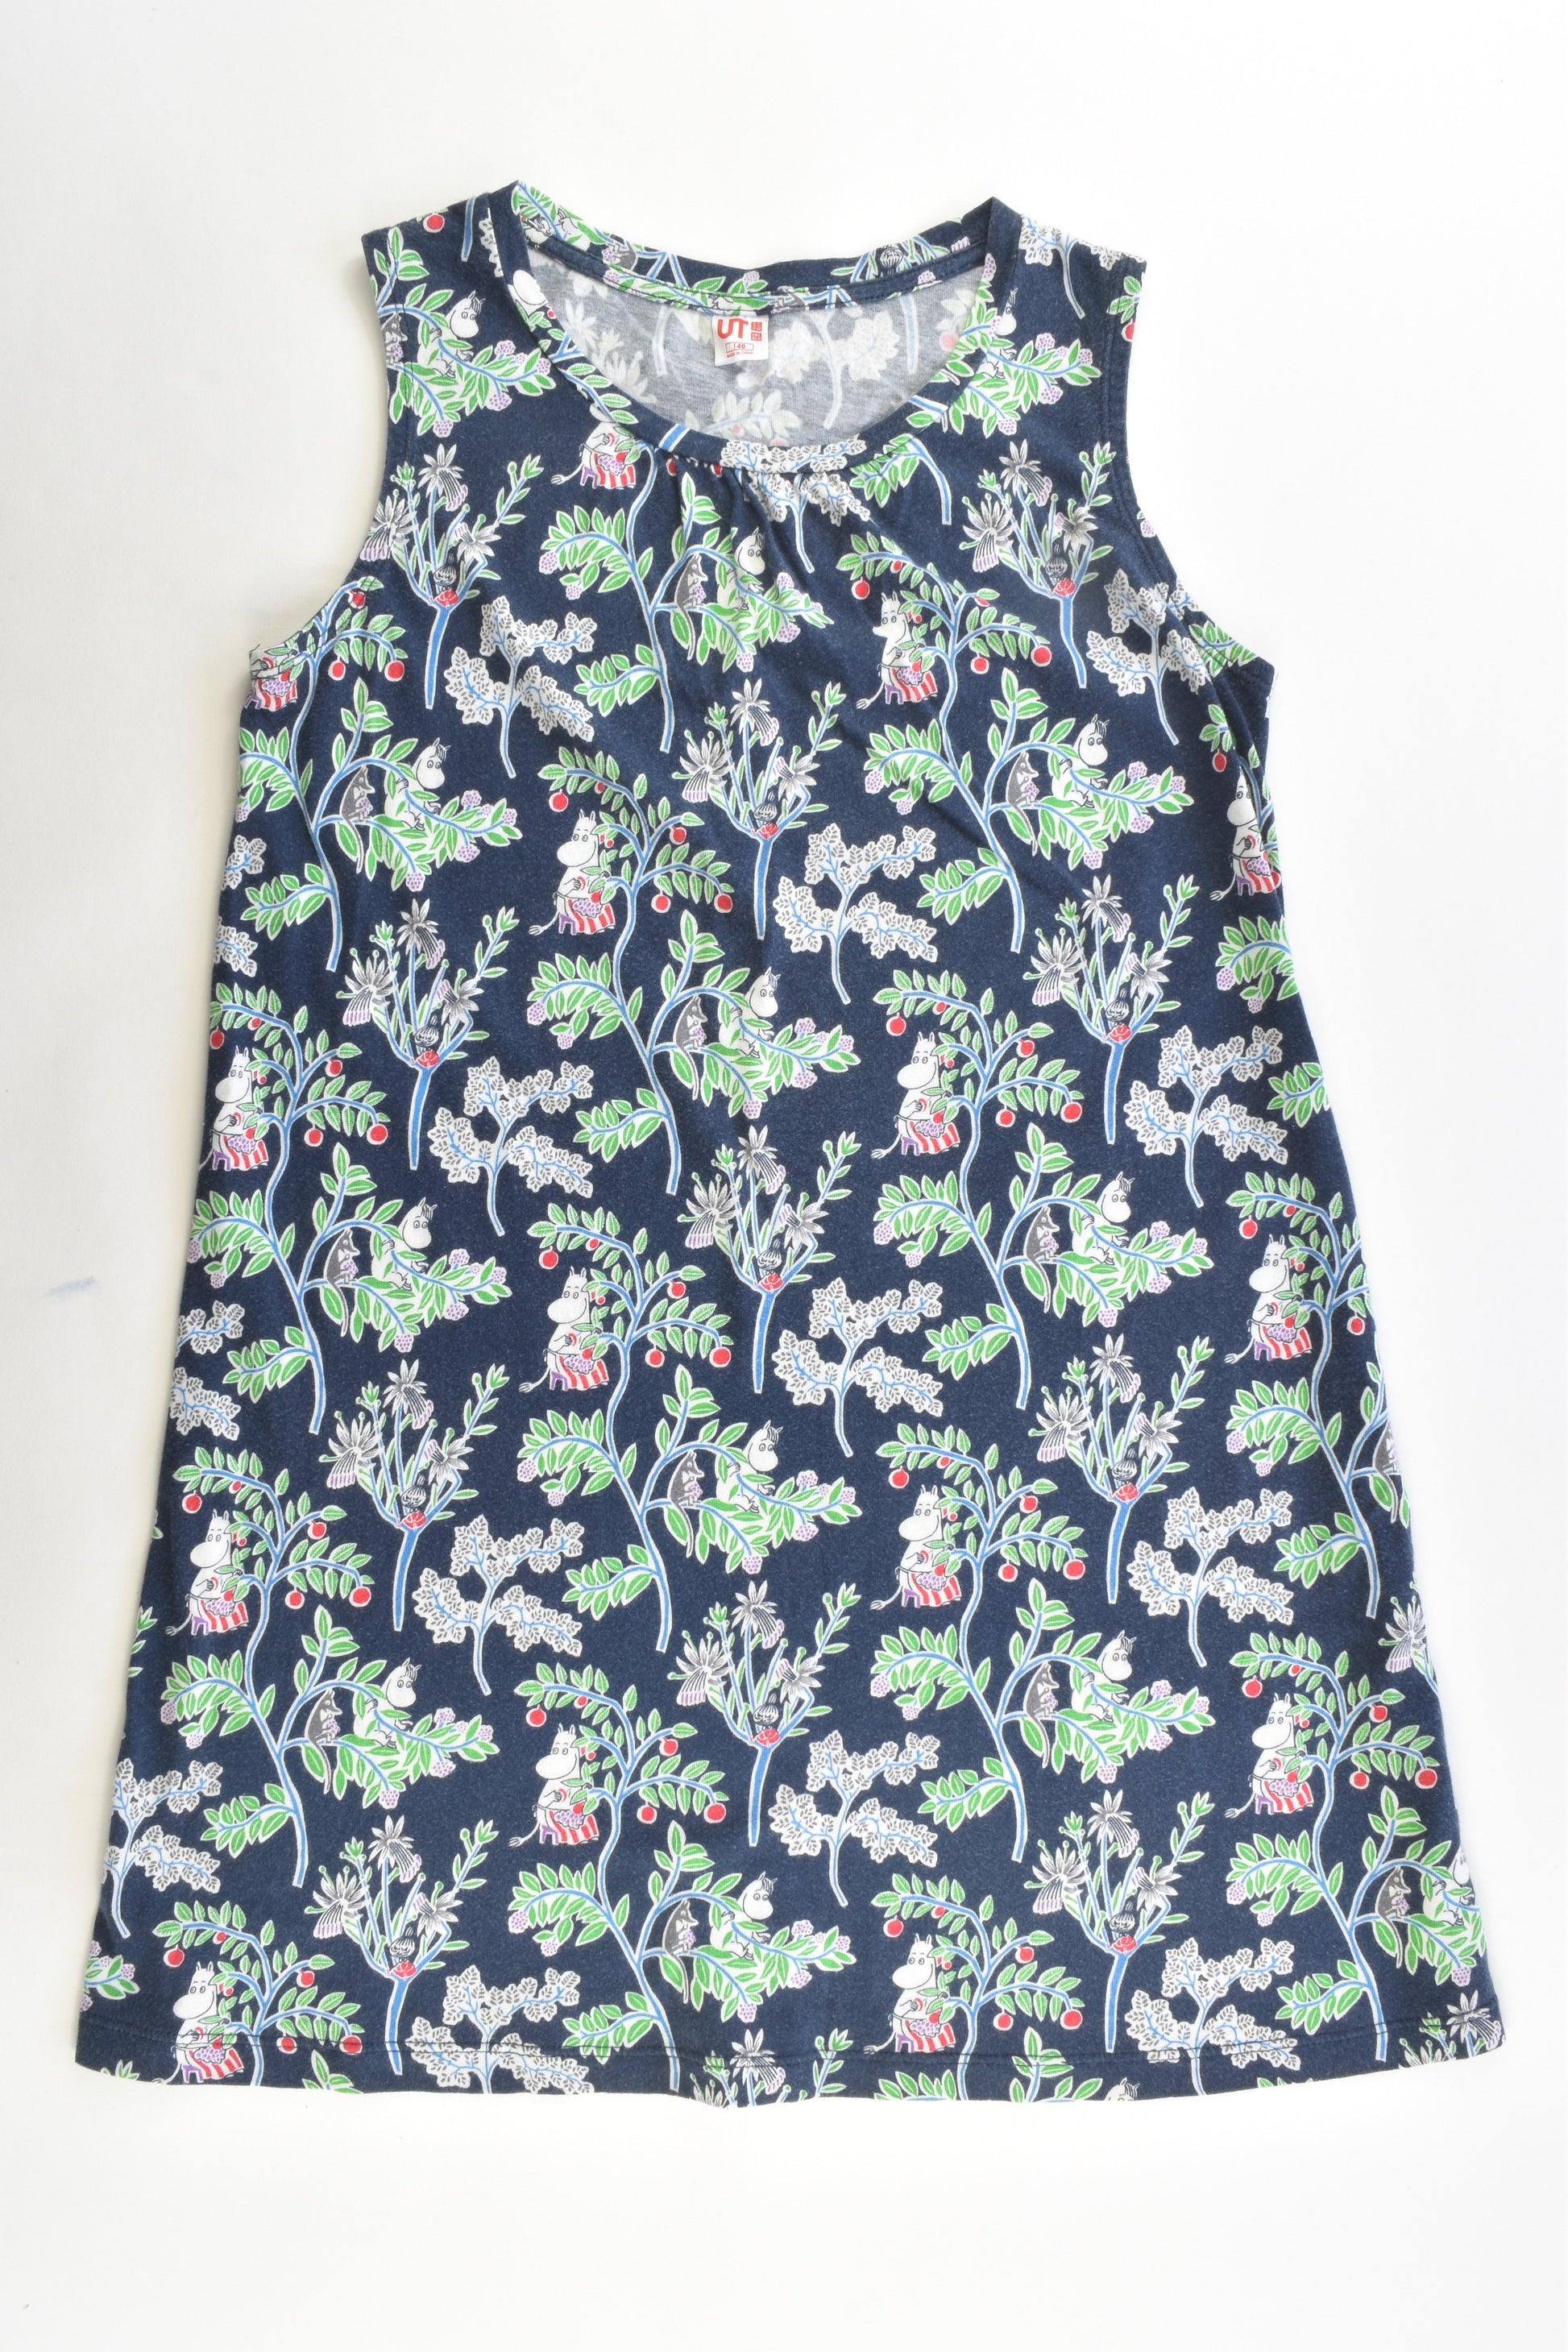 Moomin by Uniqlo Size 140 cm (Small sizing) Dress